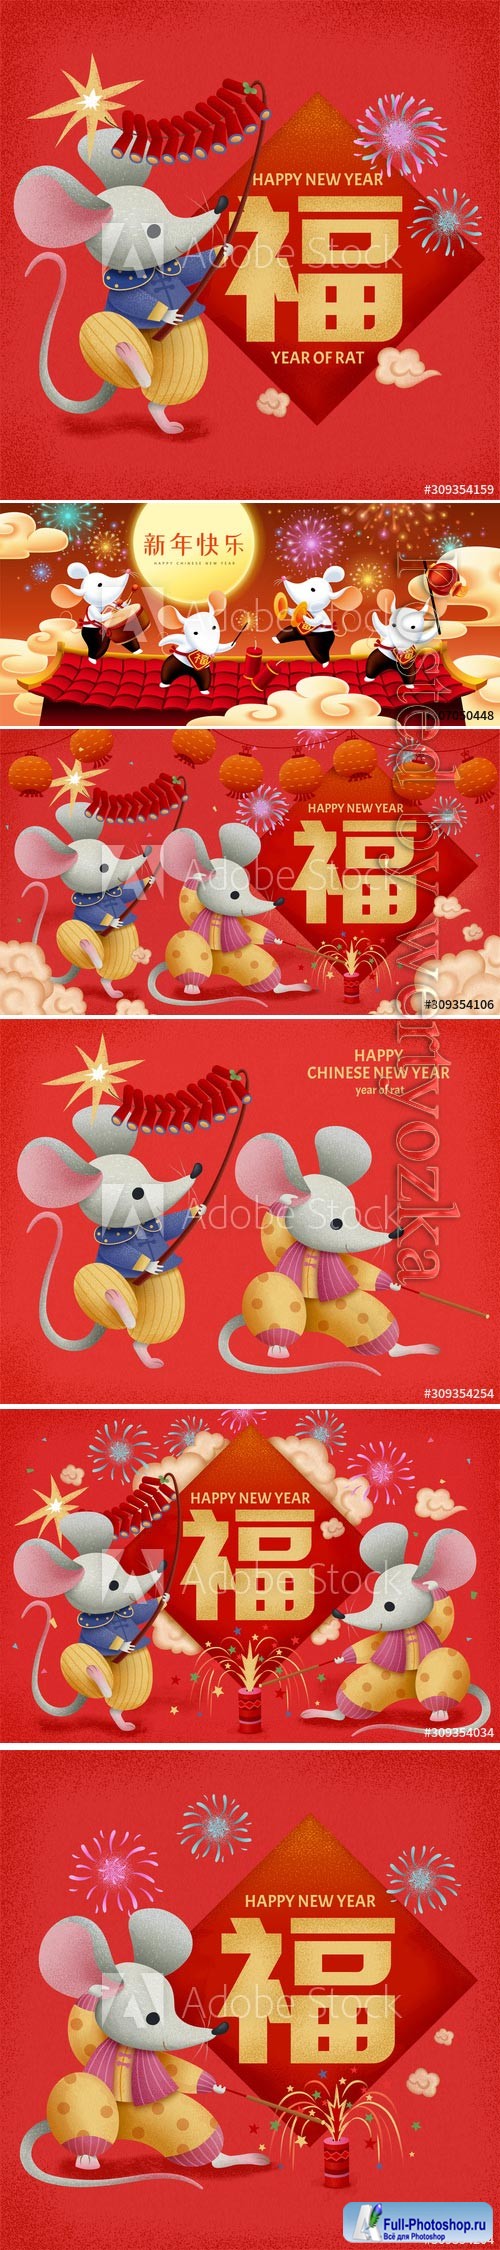 Mice lit firecrackers for new year vector design